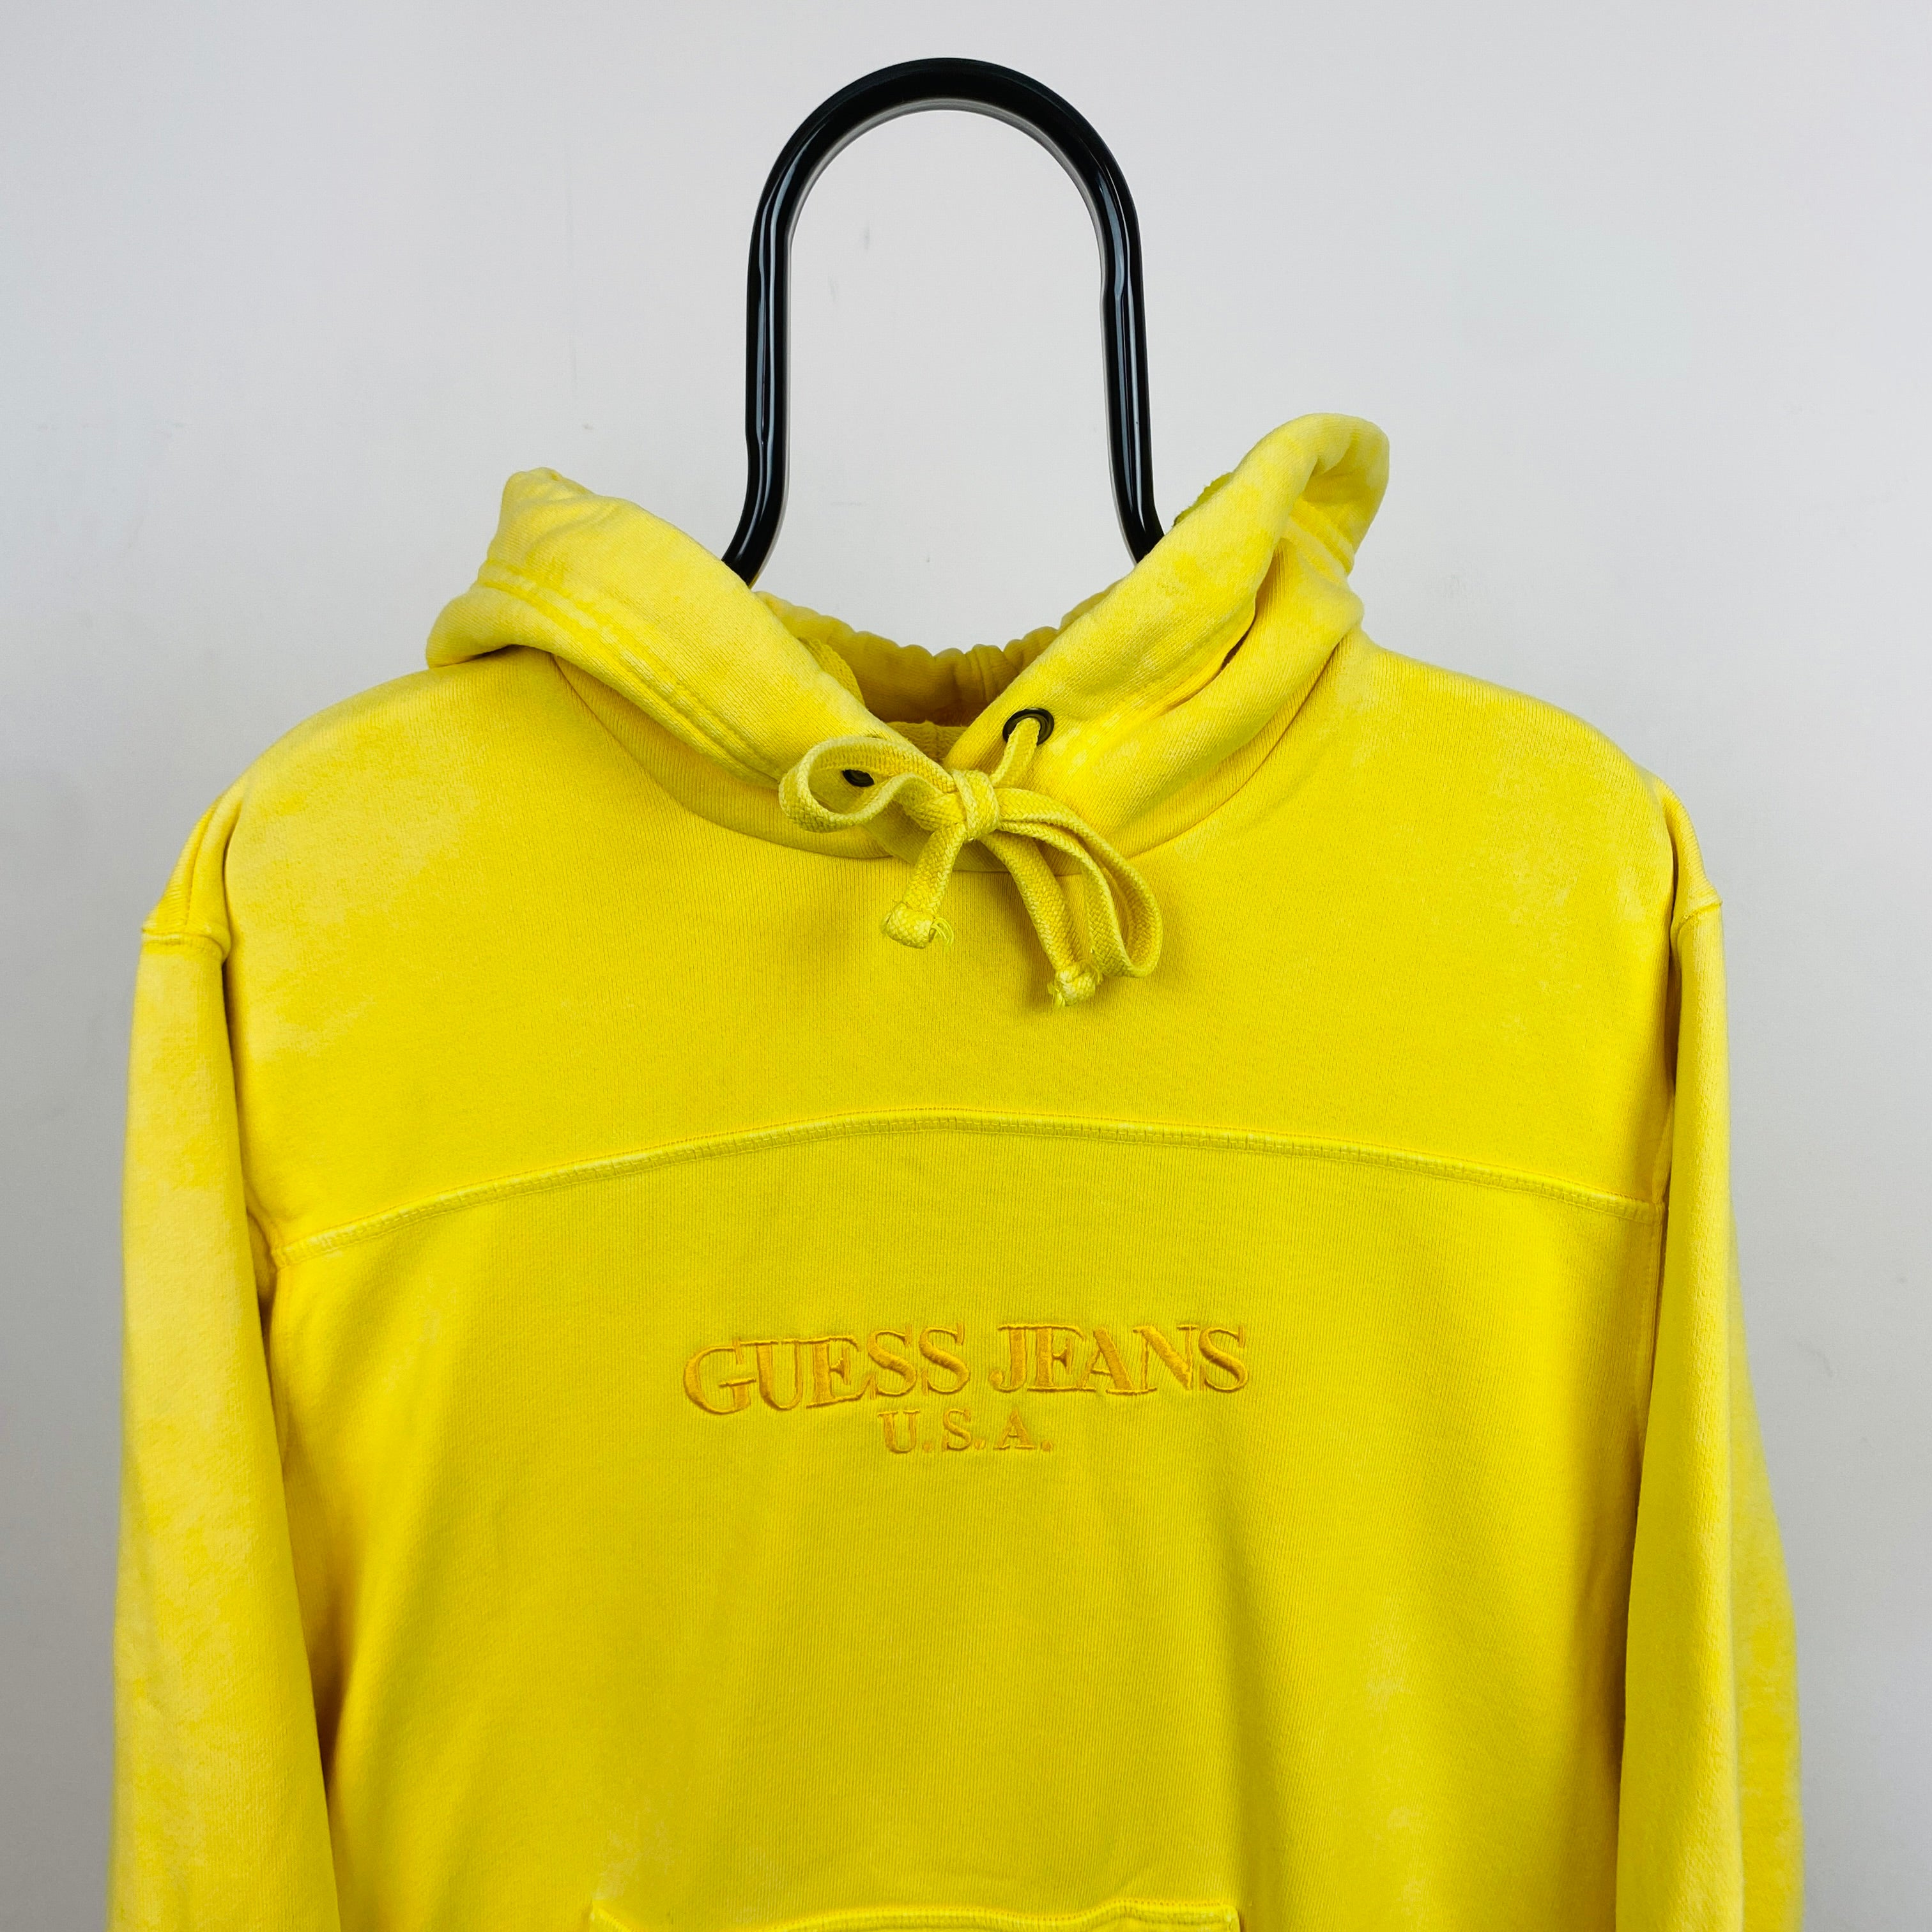 Retro Guess Jeans Hoodie Yellow Small